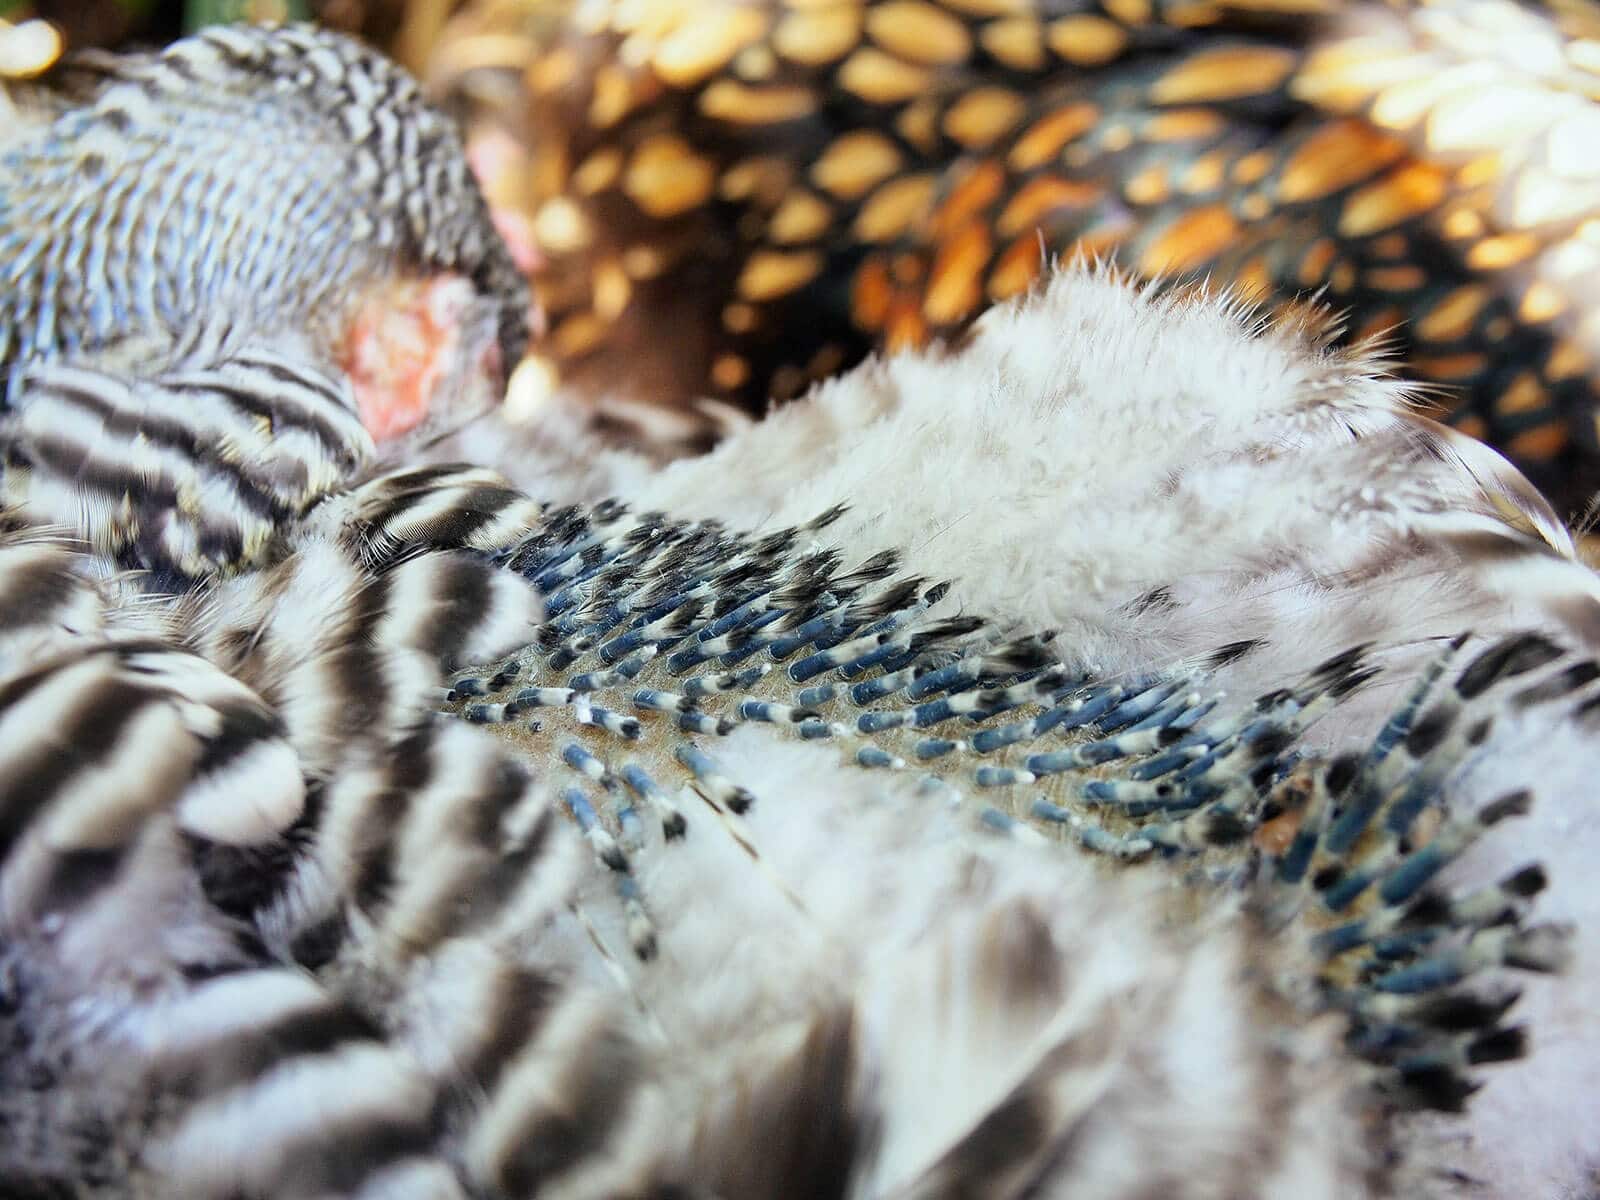 New feathers starting to emerge from the feather shafts on a chicken's back